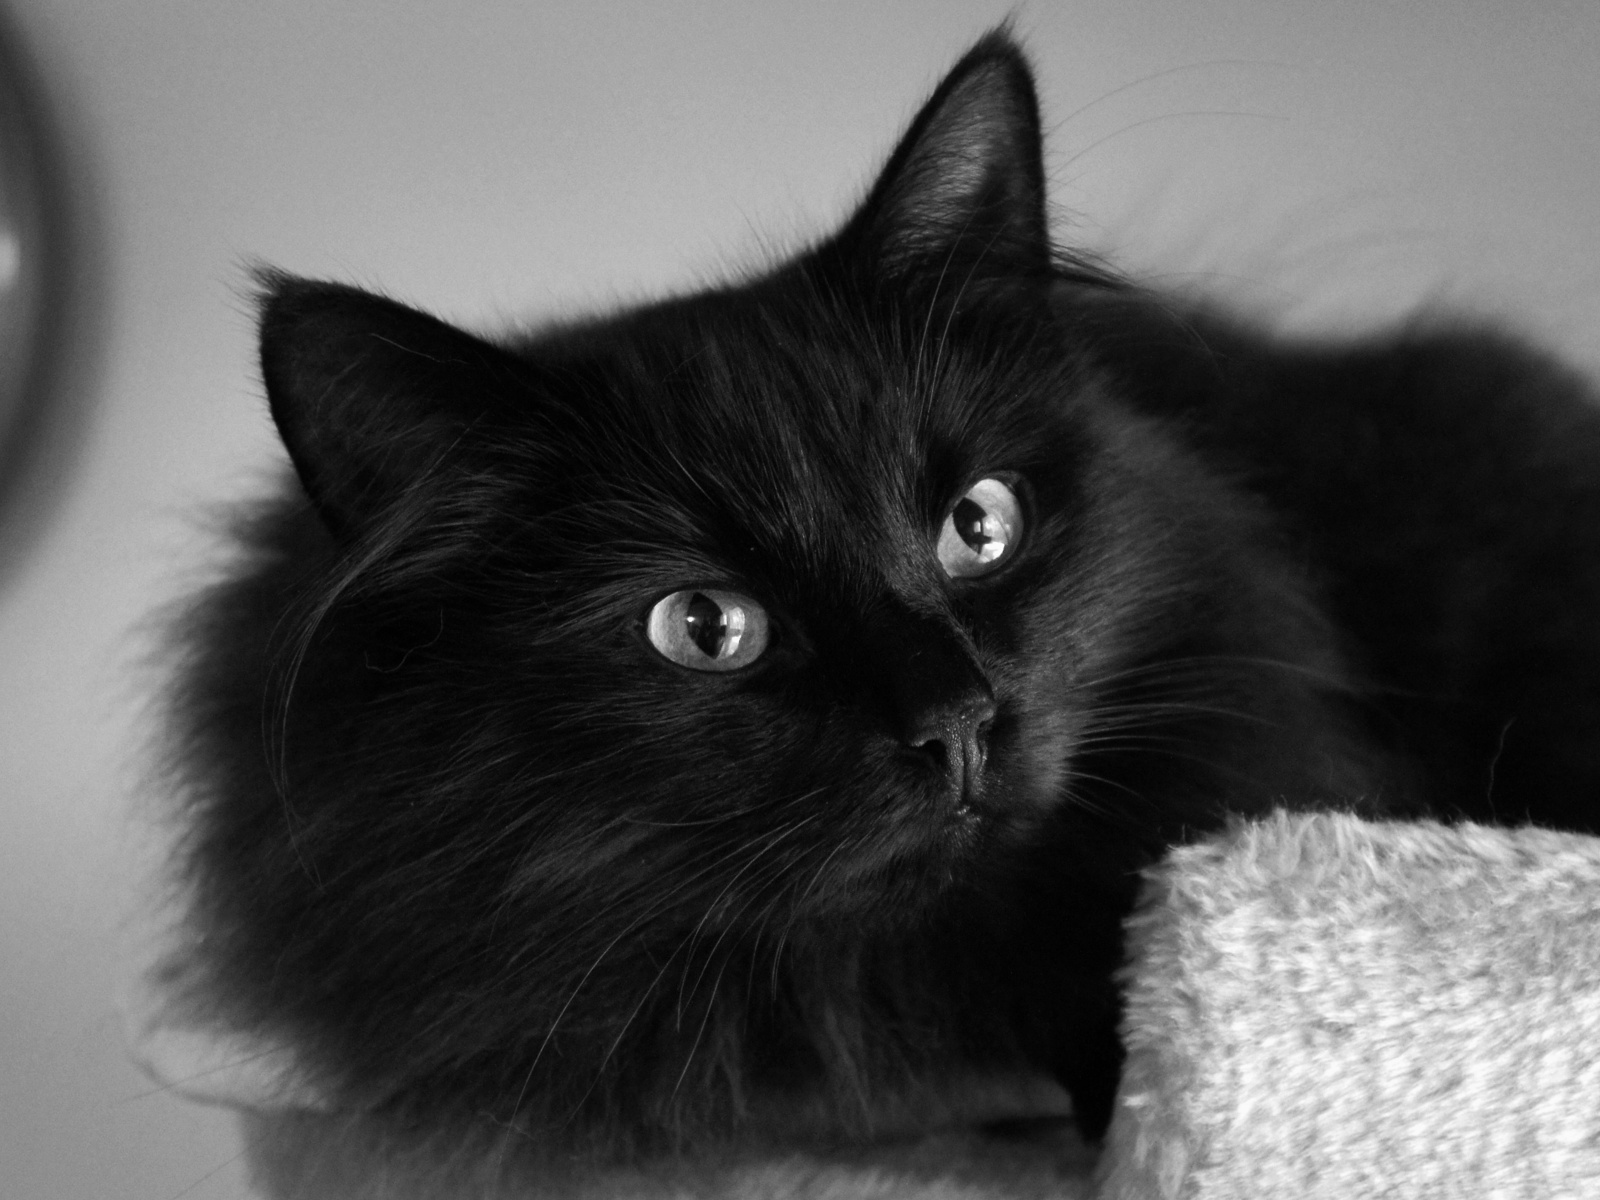 Beautiful fluffy black cat with intense stare